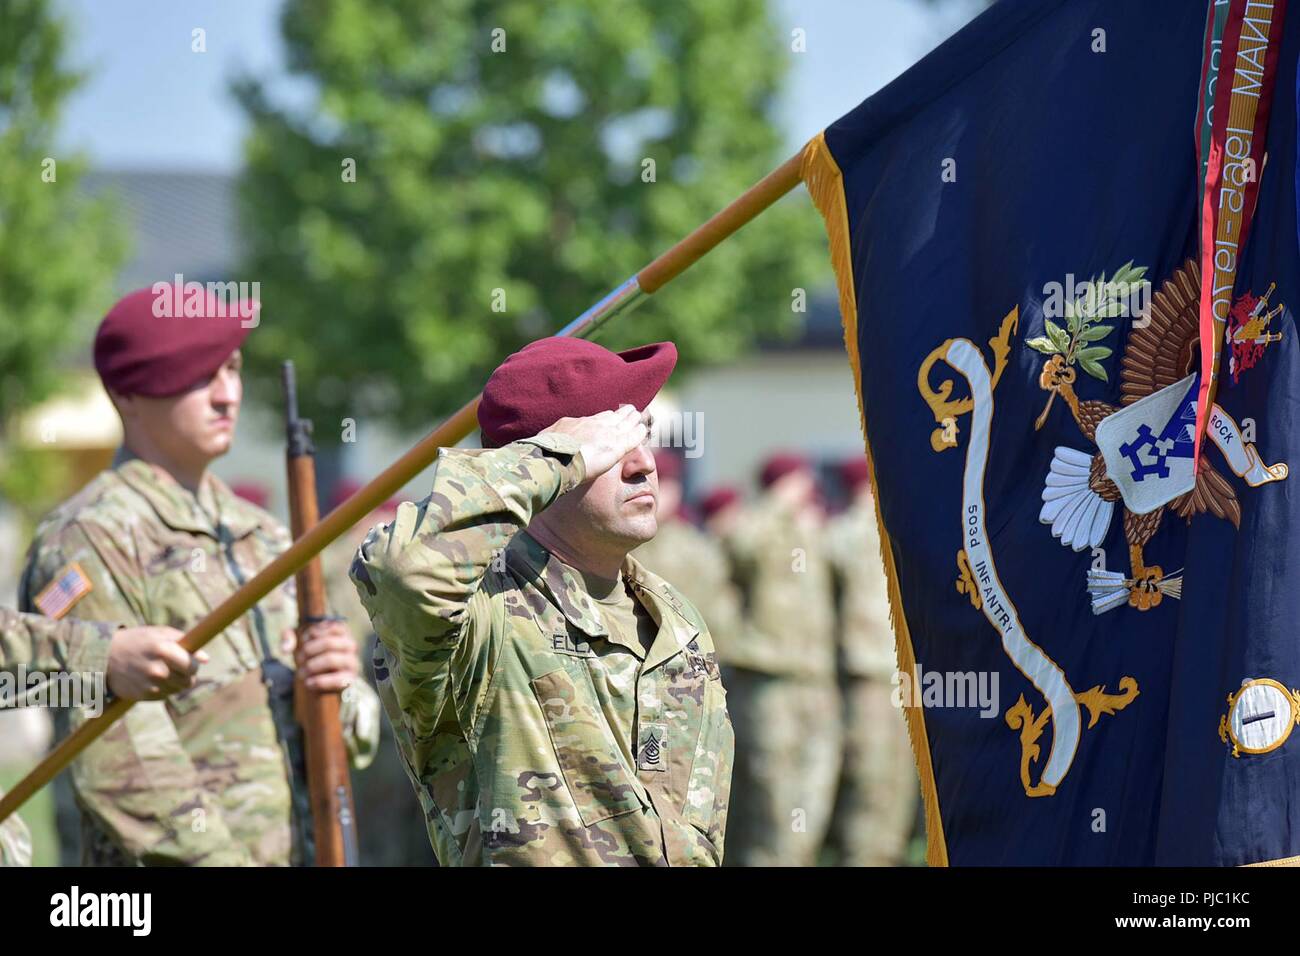 U.S. Army Sgt. Maj. Kevin A. Mclellan, Paratrooper assigned to the 1st Battalion, 503rd Infantry Regiment, 173rd Airborne Brigade, salutes and present colors during the change of responsibility ceremony at Caserma Ederle in Vicenza, Italy, July 19, 2018. The 173rd Airborne Brigade is the U.S. Army Contingency Response Force in Europe, capable of projecting ready forces anywhere in the U.S. European, Africa or Central Commands' areas of responsibility. Stock Photo